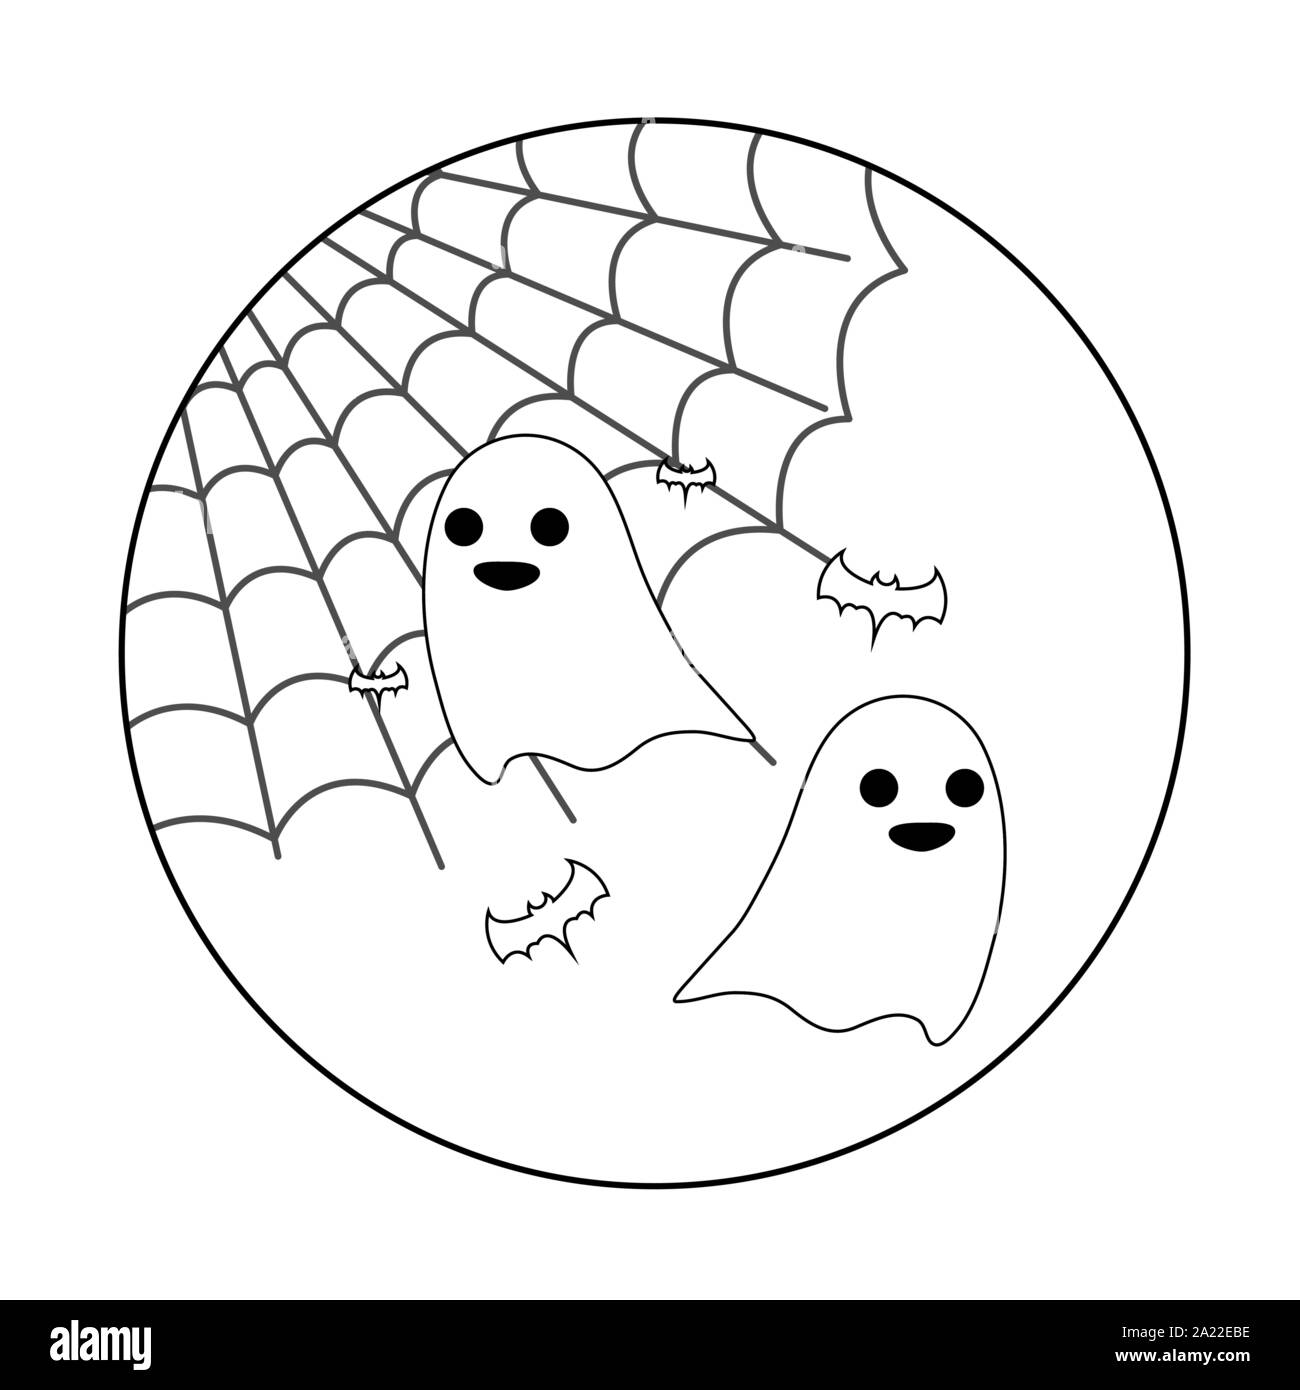 scene of ghost with icons halloween vector illustration design Stock Vector